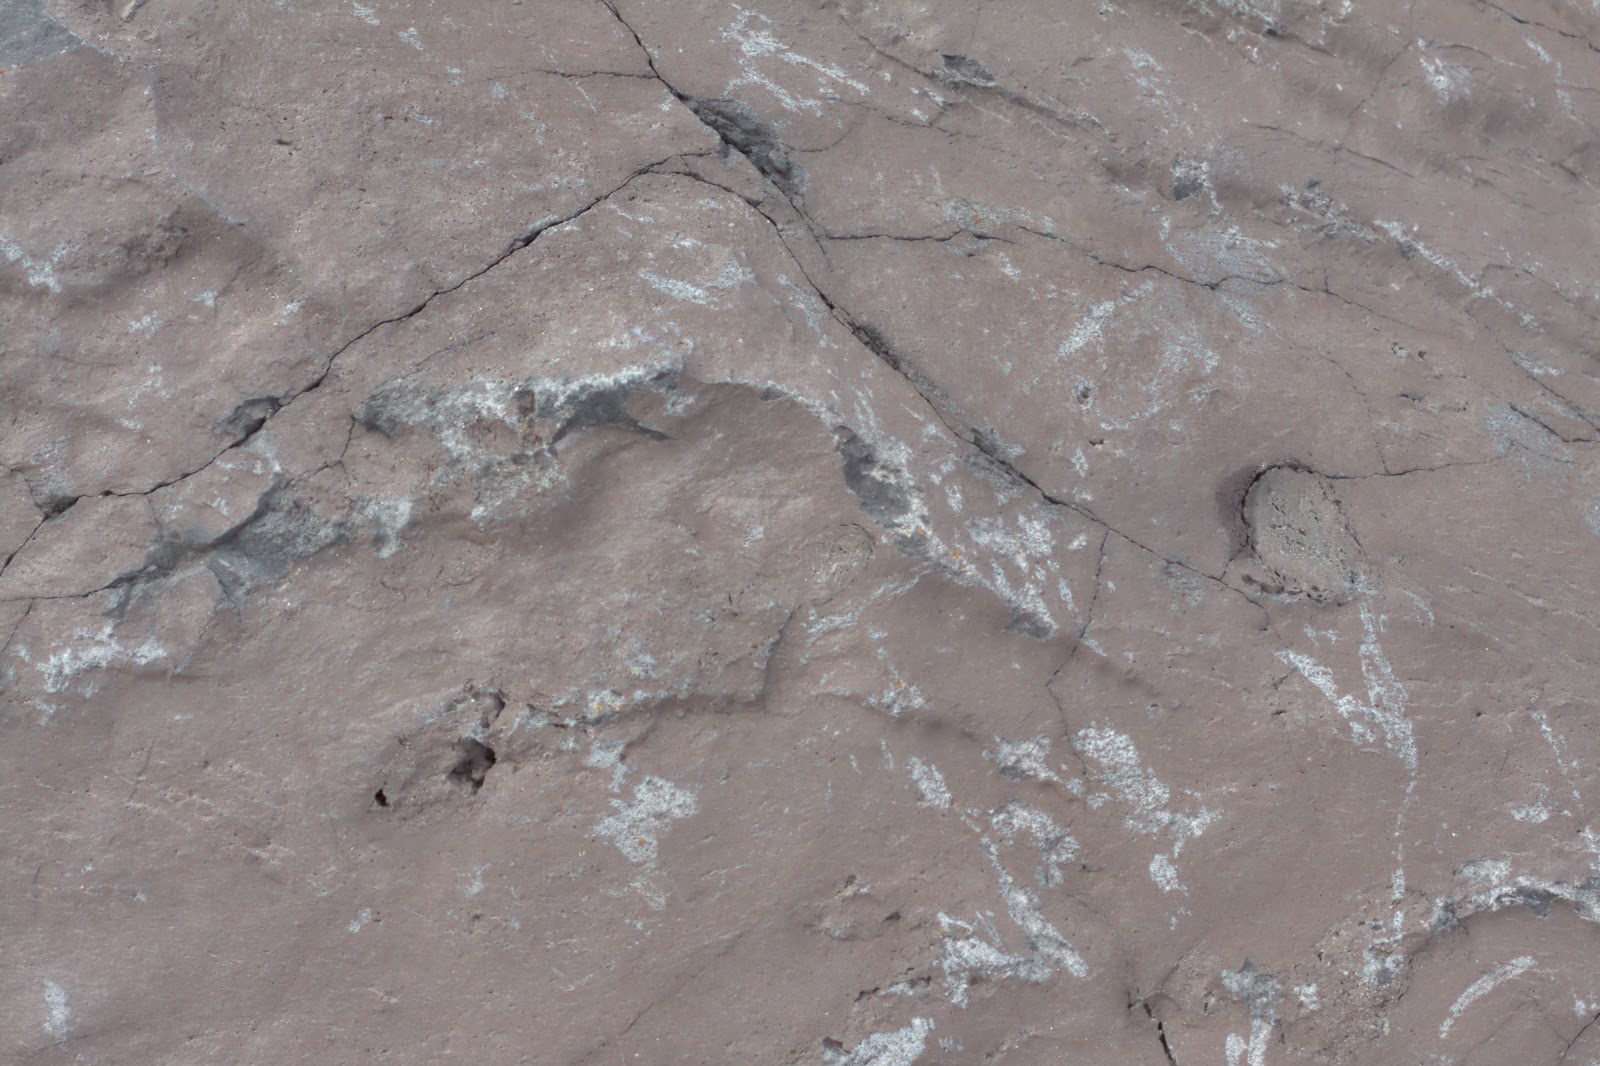 Stone rock surface texture 4770x3178